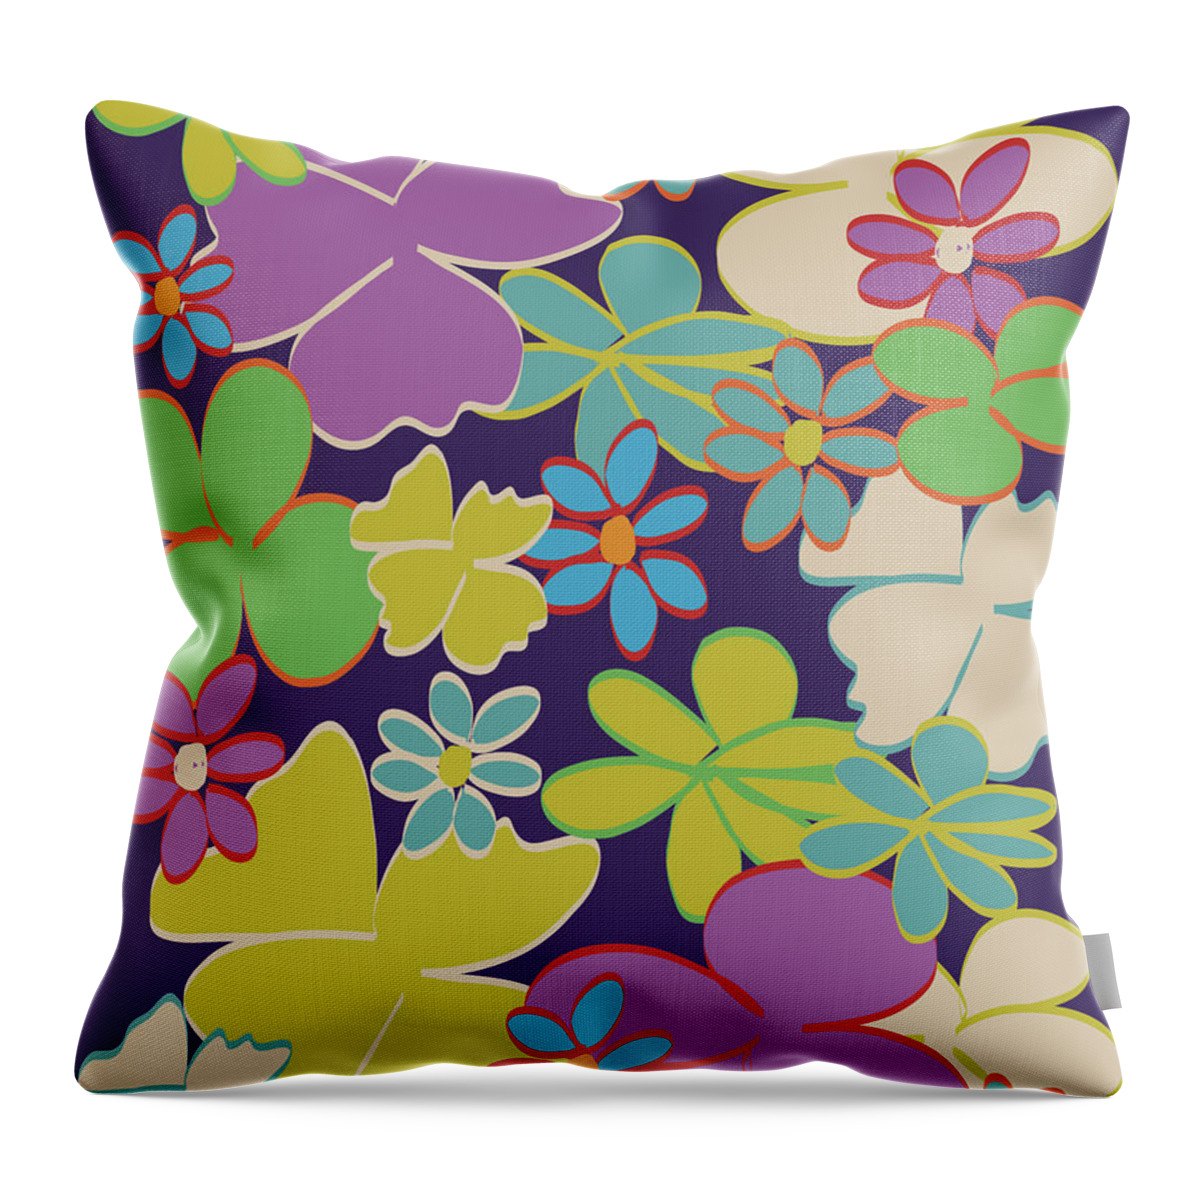 Hand-drawn Flowers Throw Pillow featuring the digital art Bright Blooms on Dark Purple by Lisa Blake